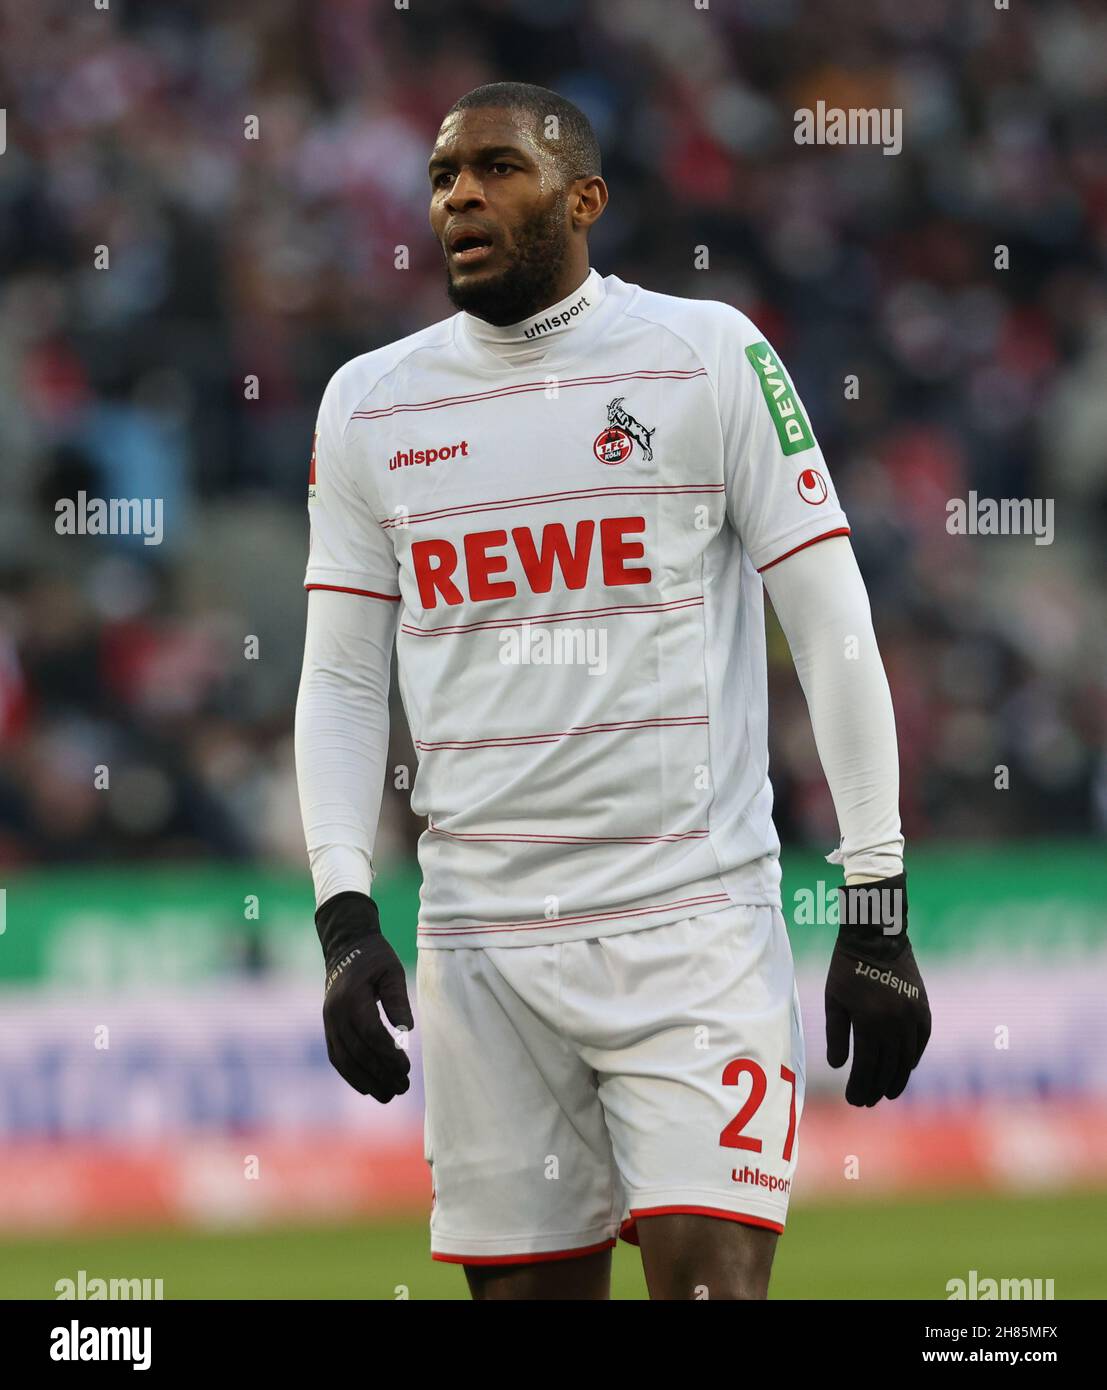 Gladbach Football High Resolution Stock Photography and Images - Alamy